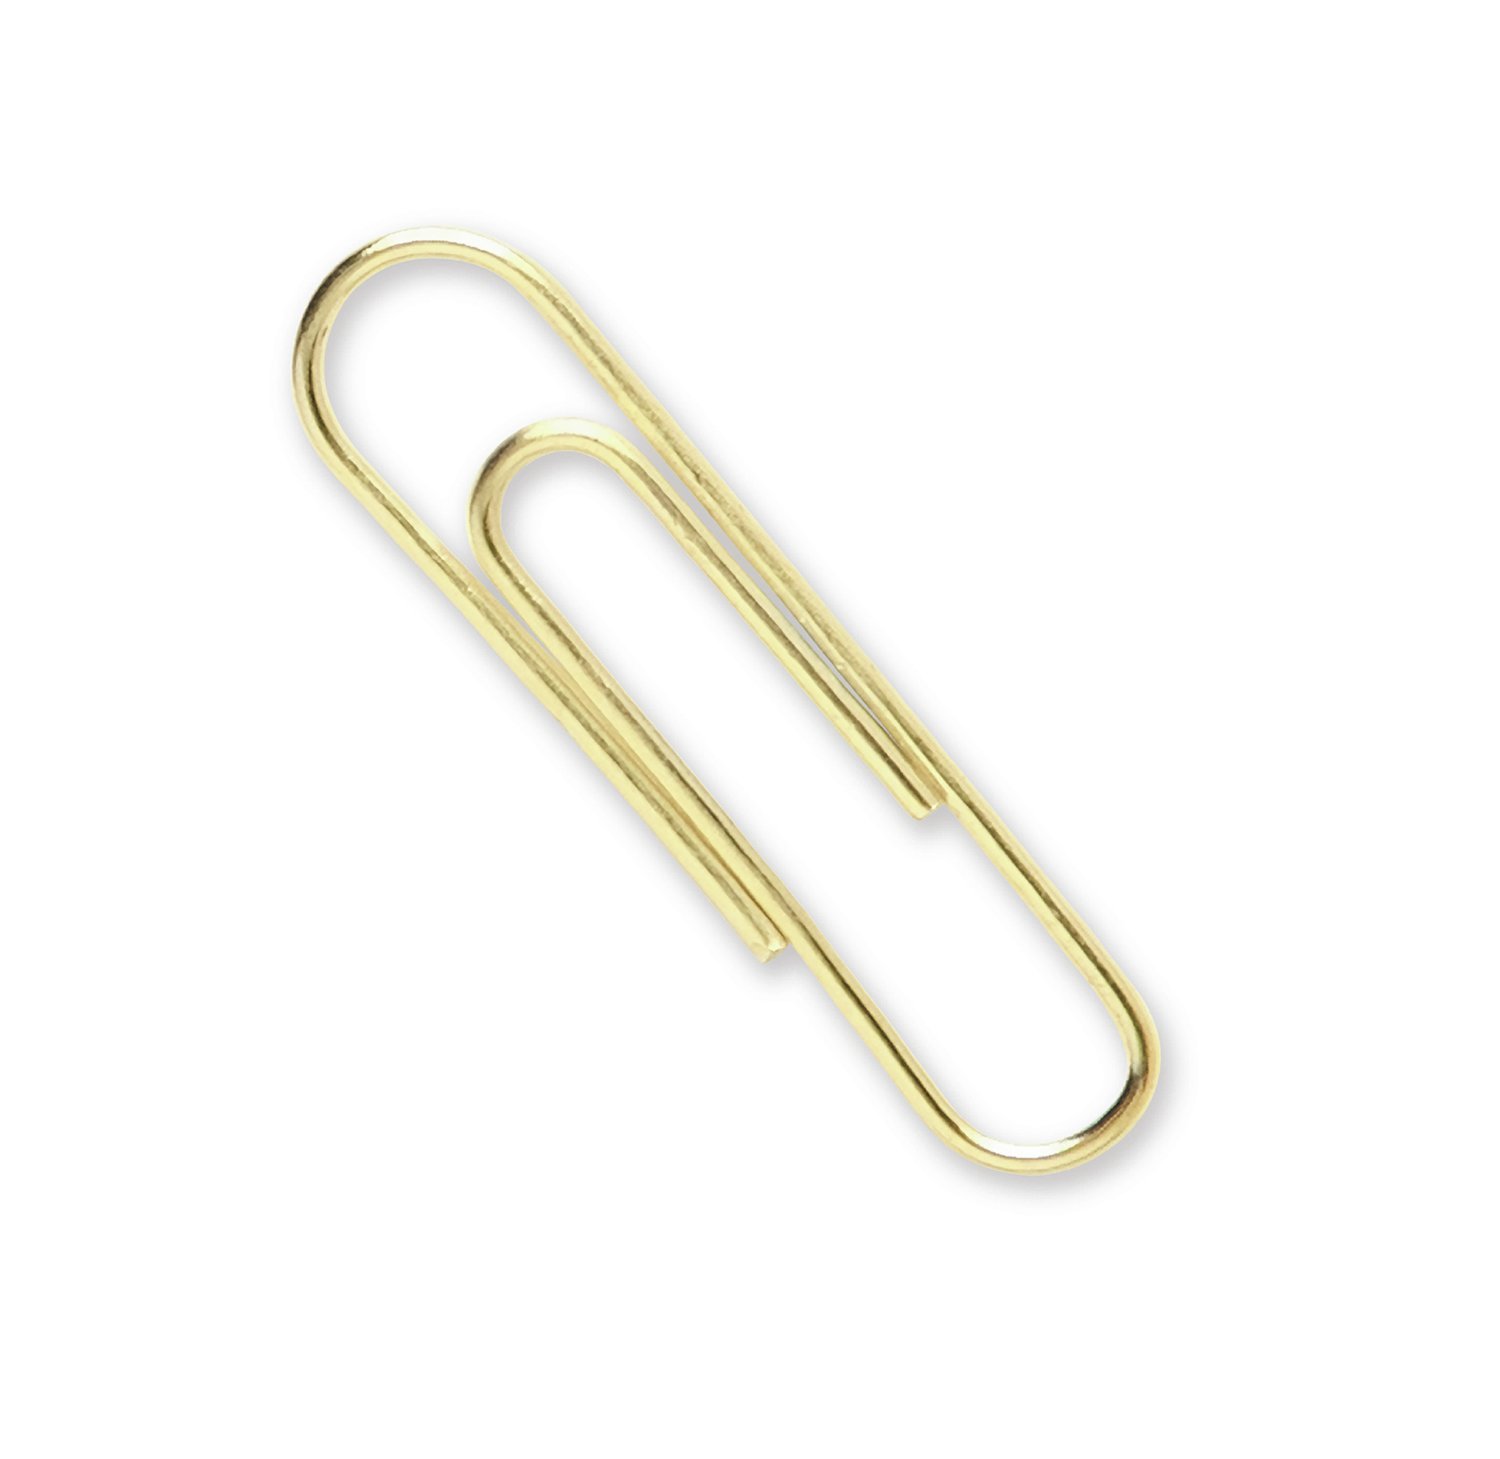 Amazon.com : ACCO Smooth Gold Tone #2 Size Paper Clips, 100 Clips ...